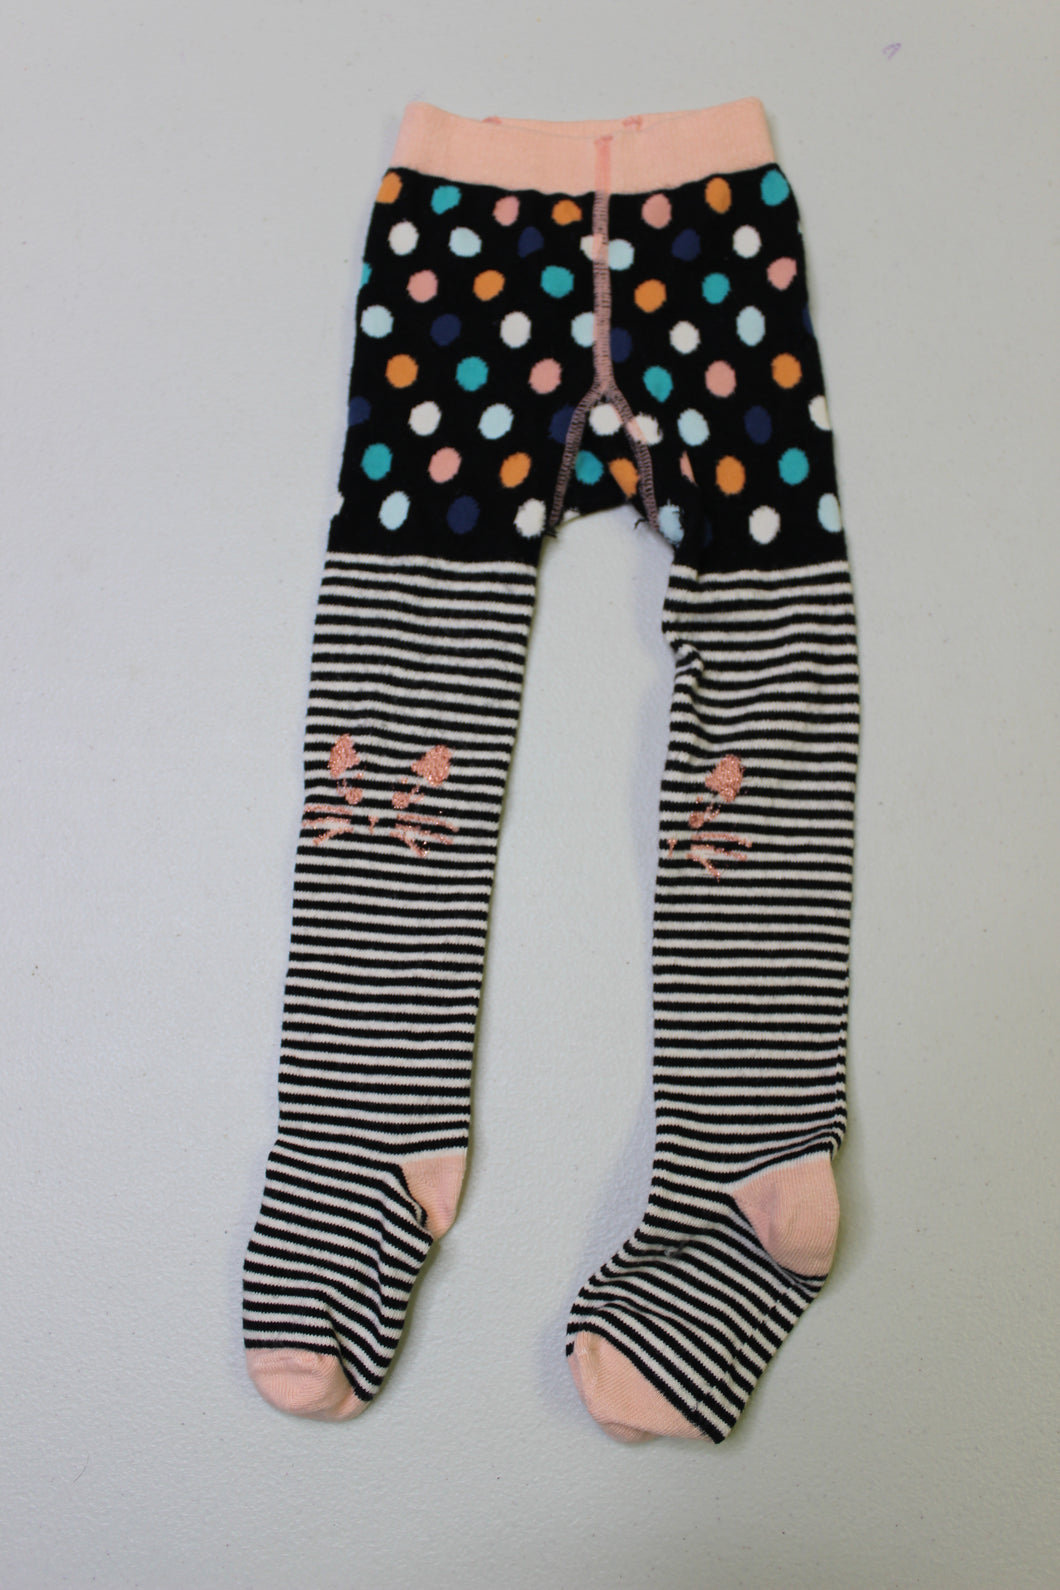 Matilda Jane Clothing SIZE 12-24 months kitty polka dot and stripes tights 12 months